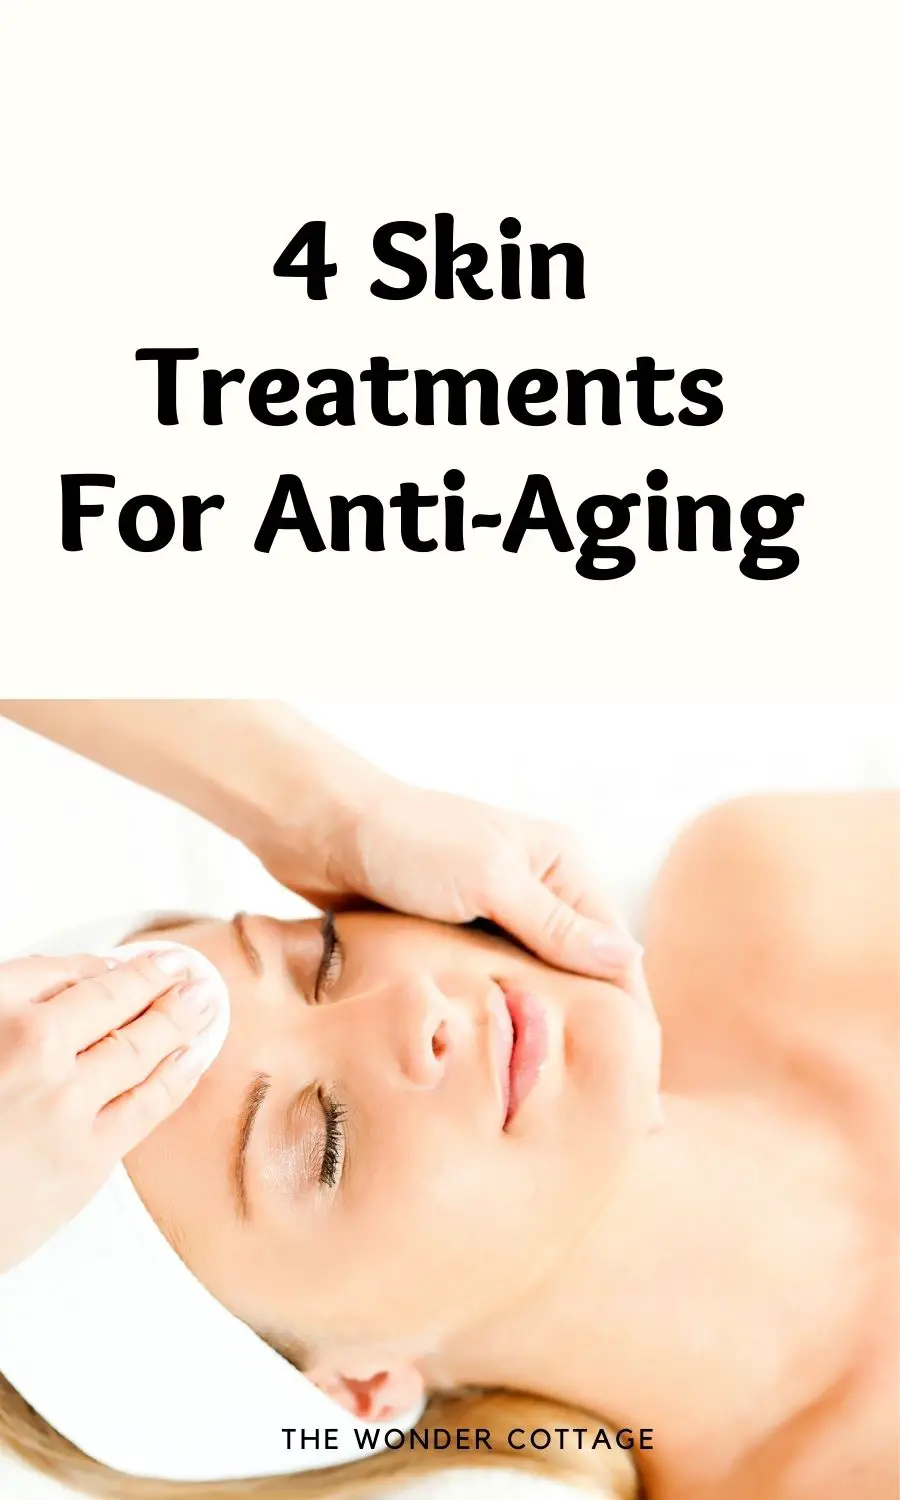 Skin treatments for anti-aging